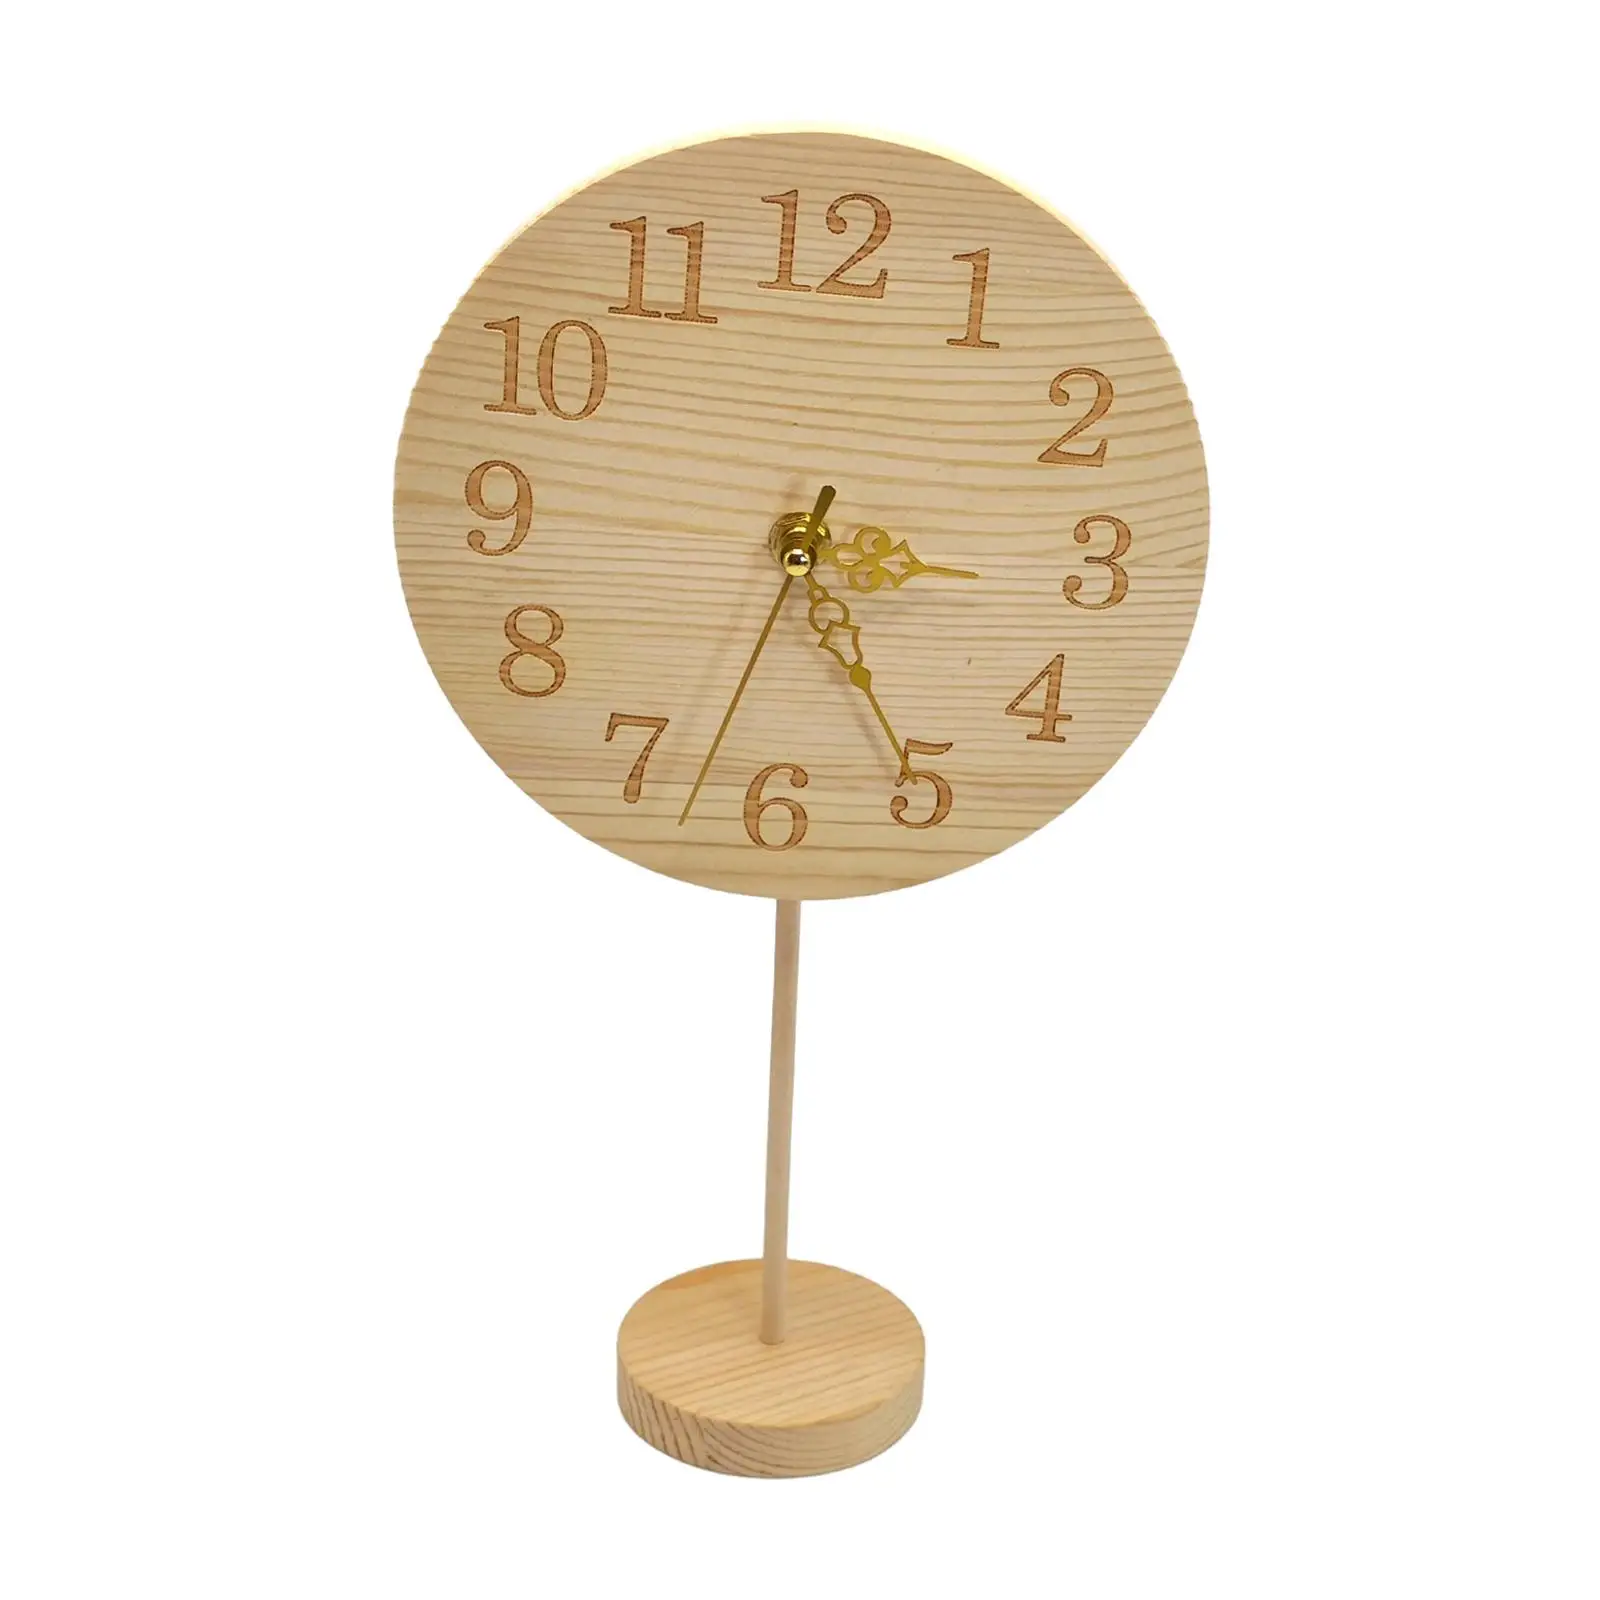 Wooden Table Clock Elegant Collections Portable Mute Desk Clock Alarm Clock for Bedside Countertop Entrance Study Room Fireplace